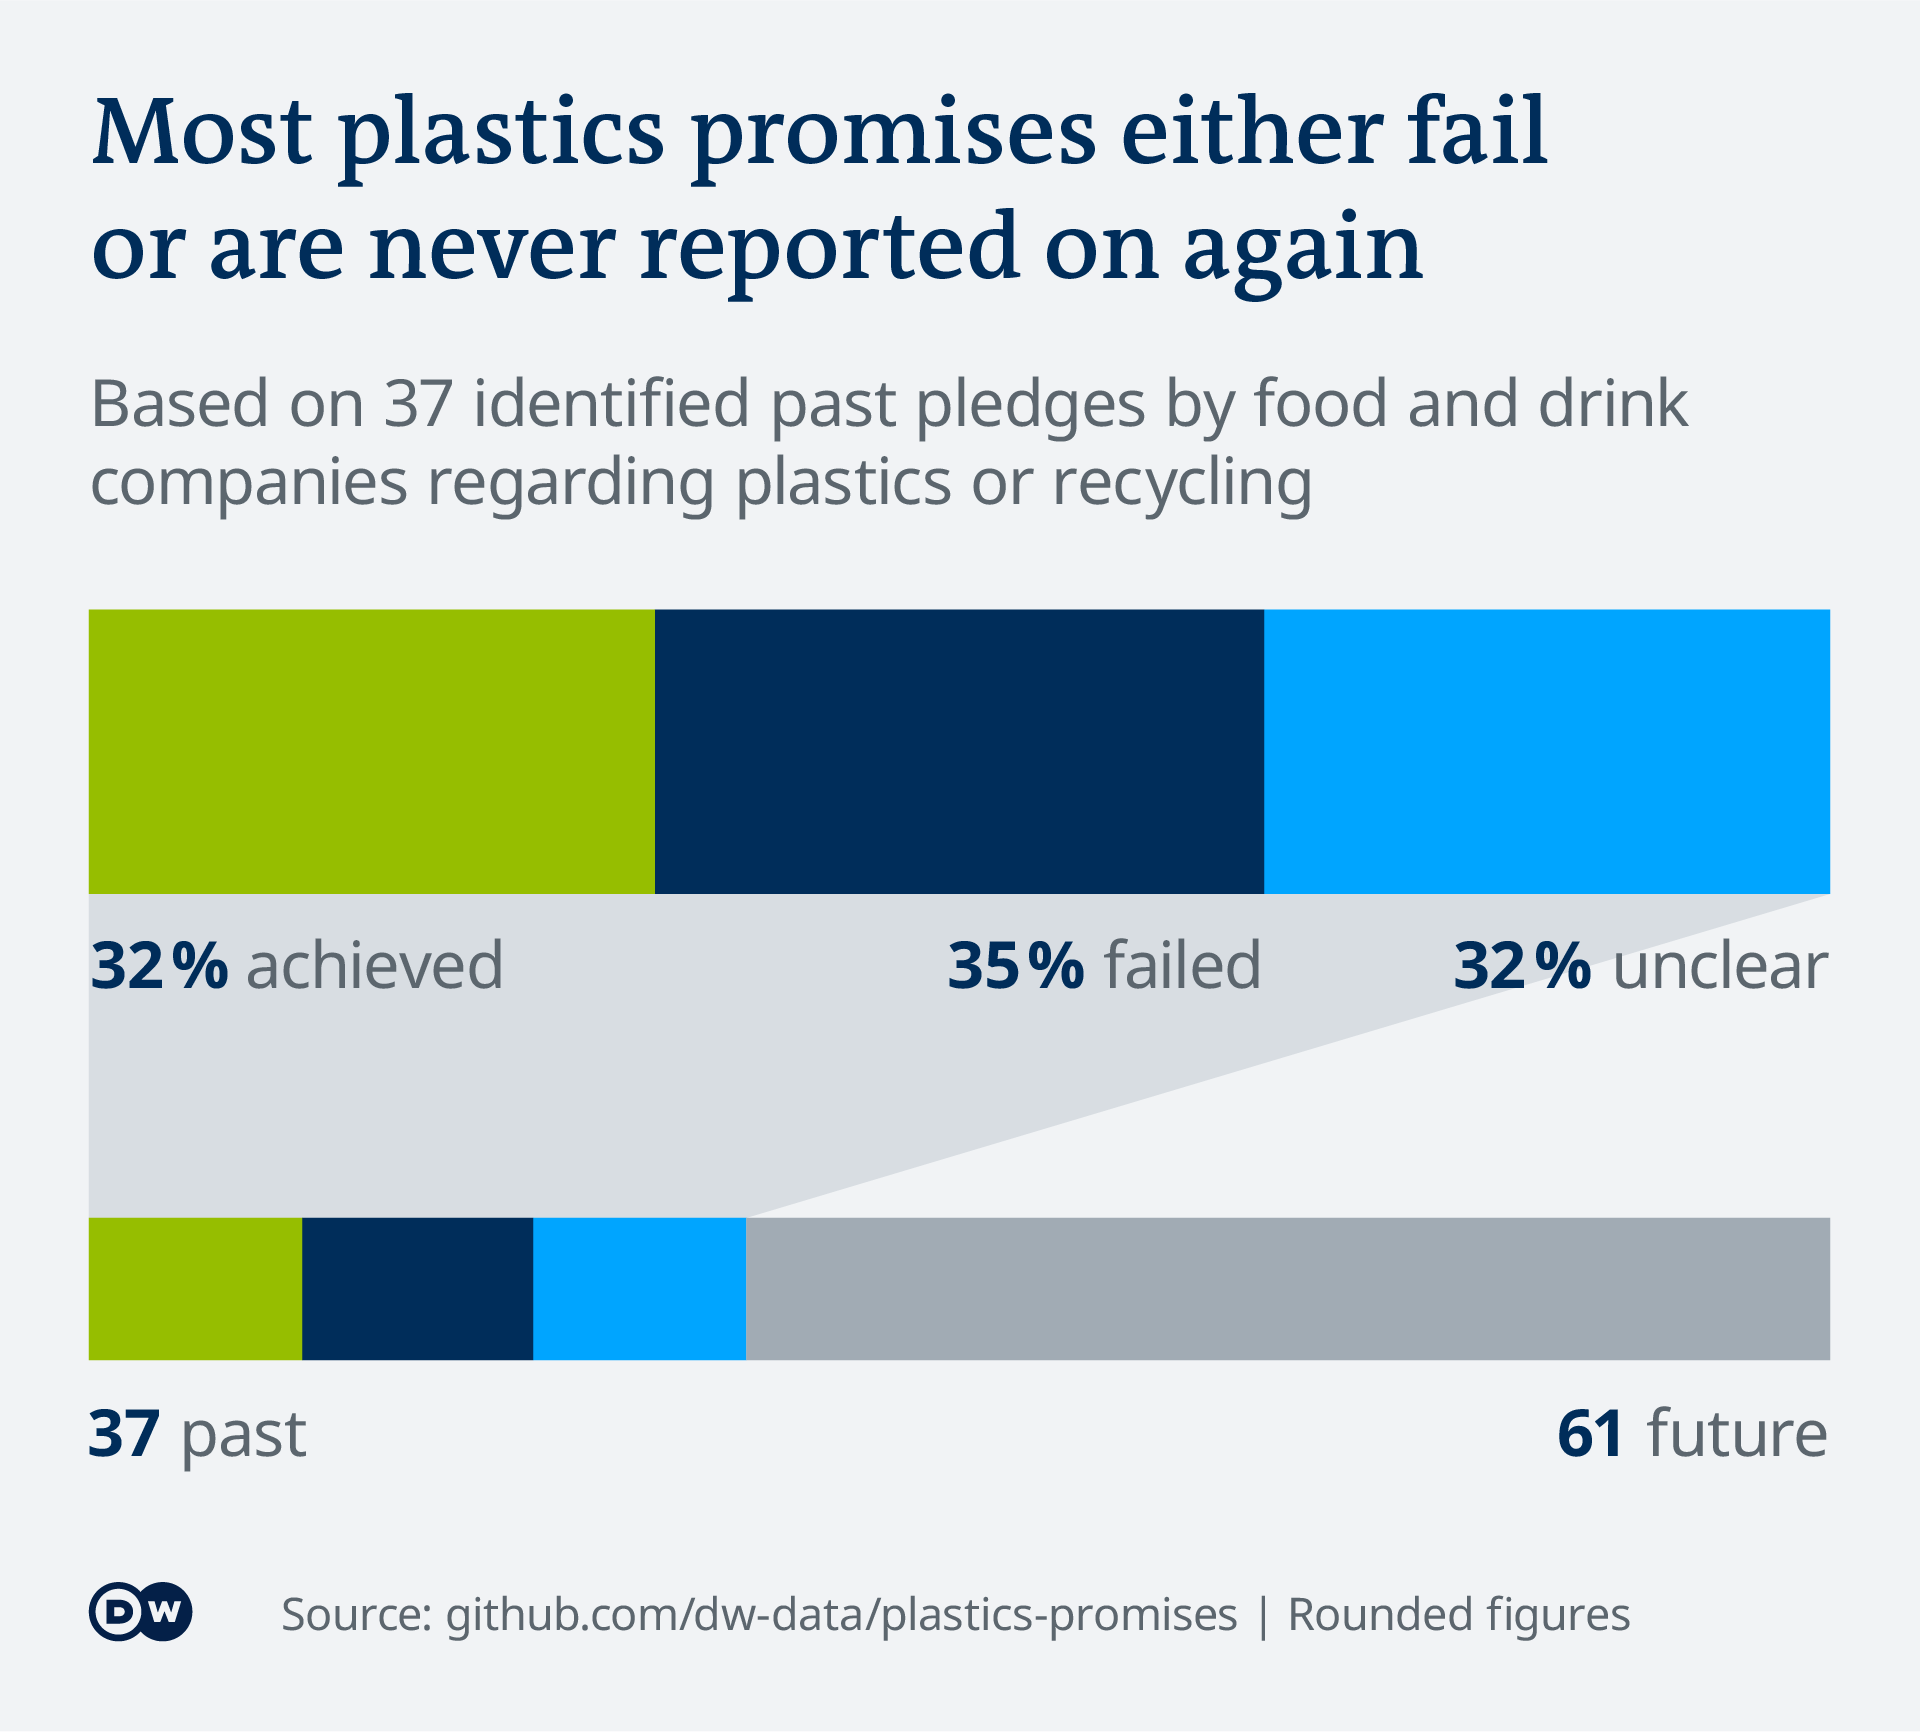 Infographic shows proportion of plastics commitments that were achieved